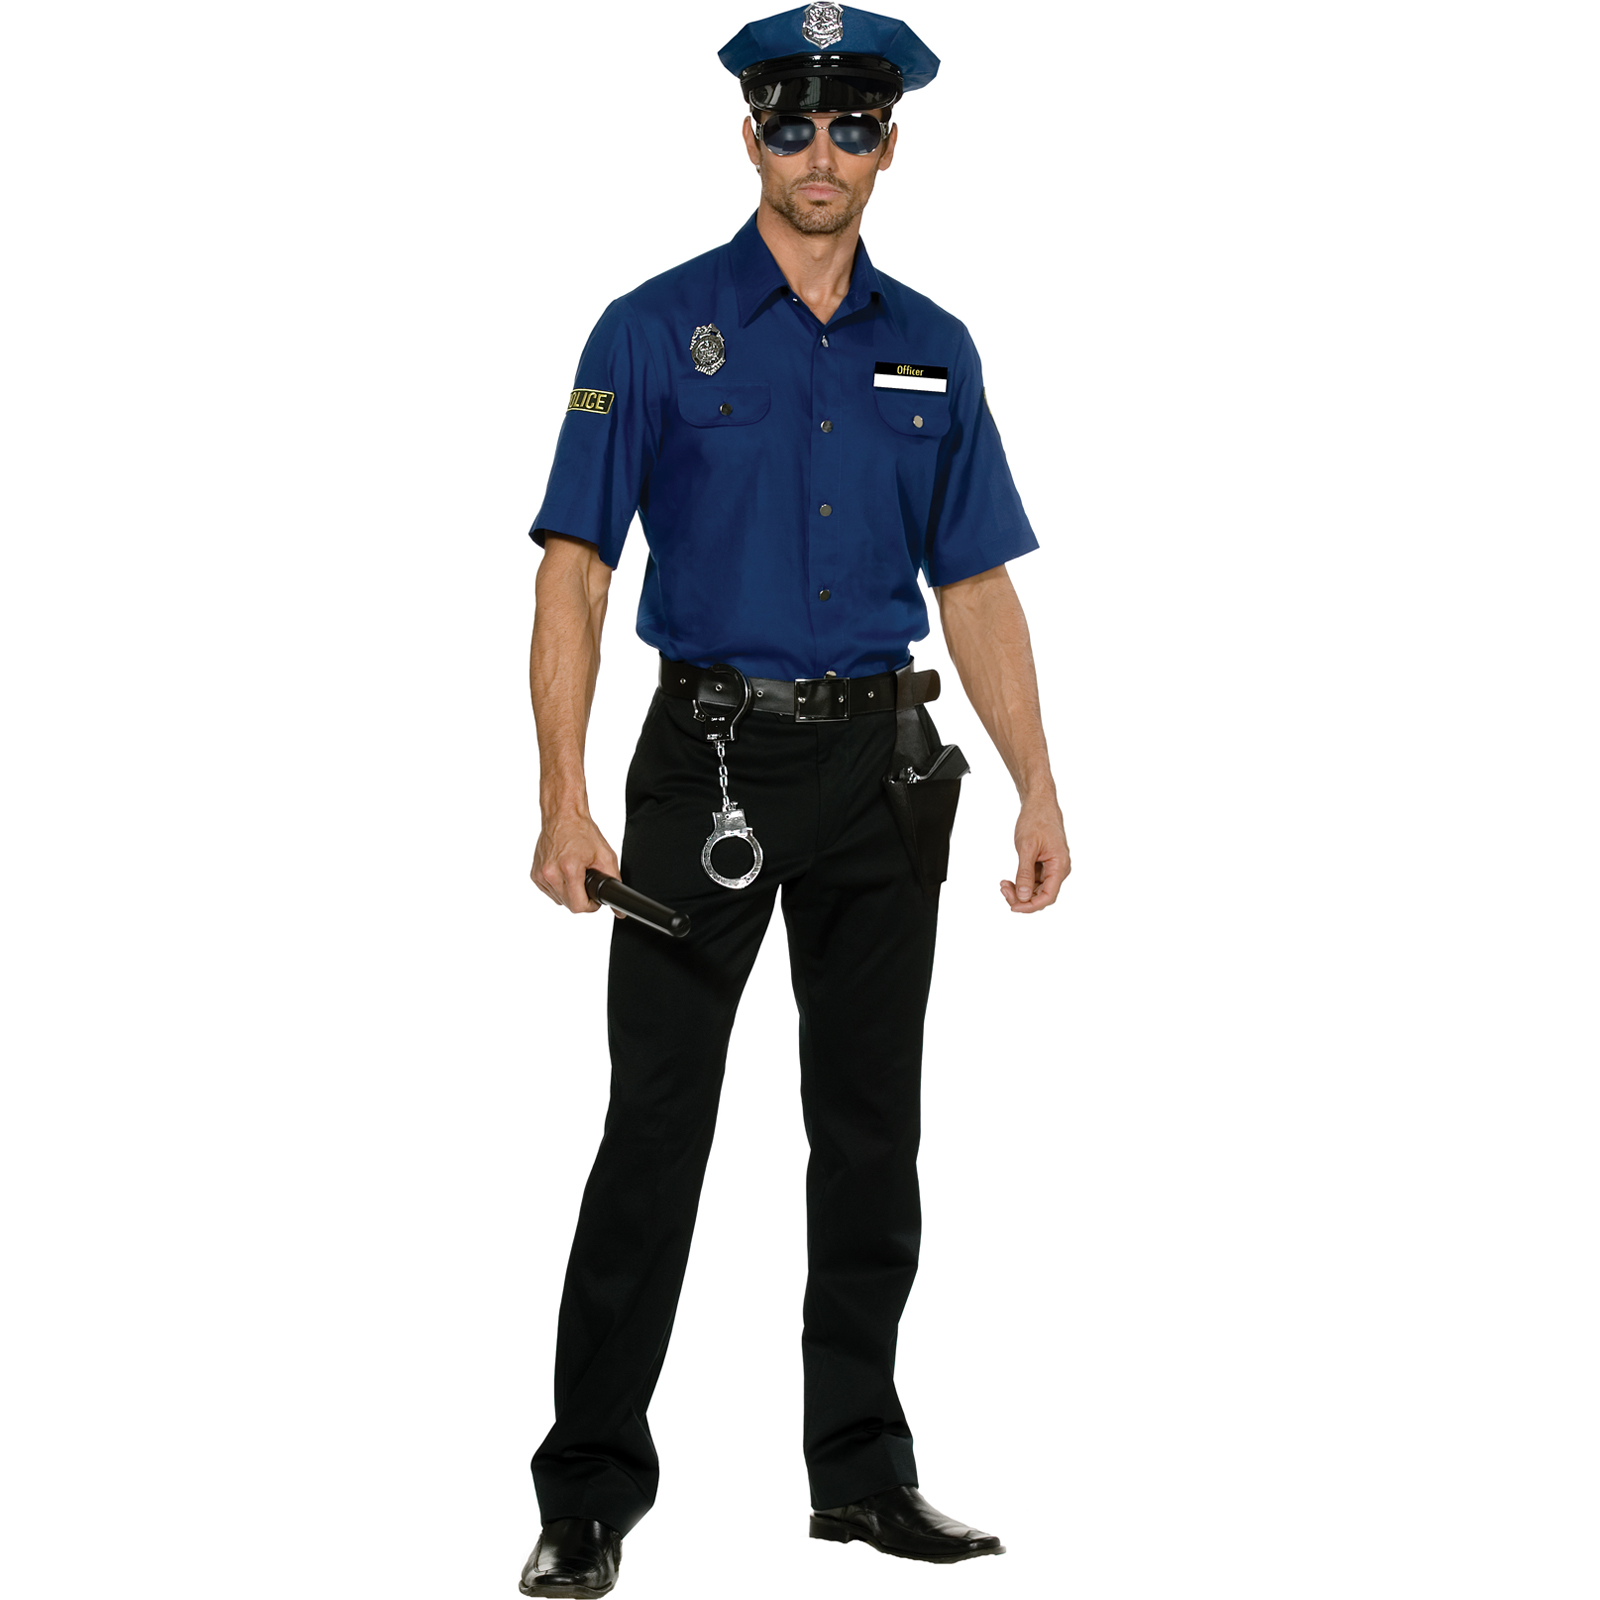 Police Costumes For Men